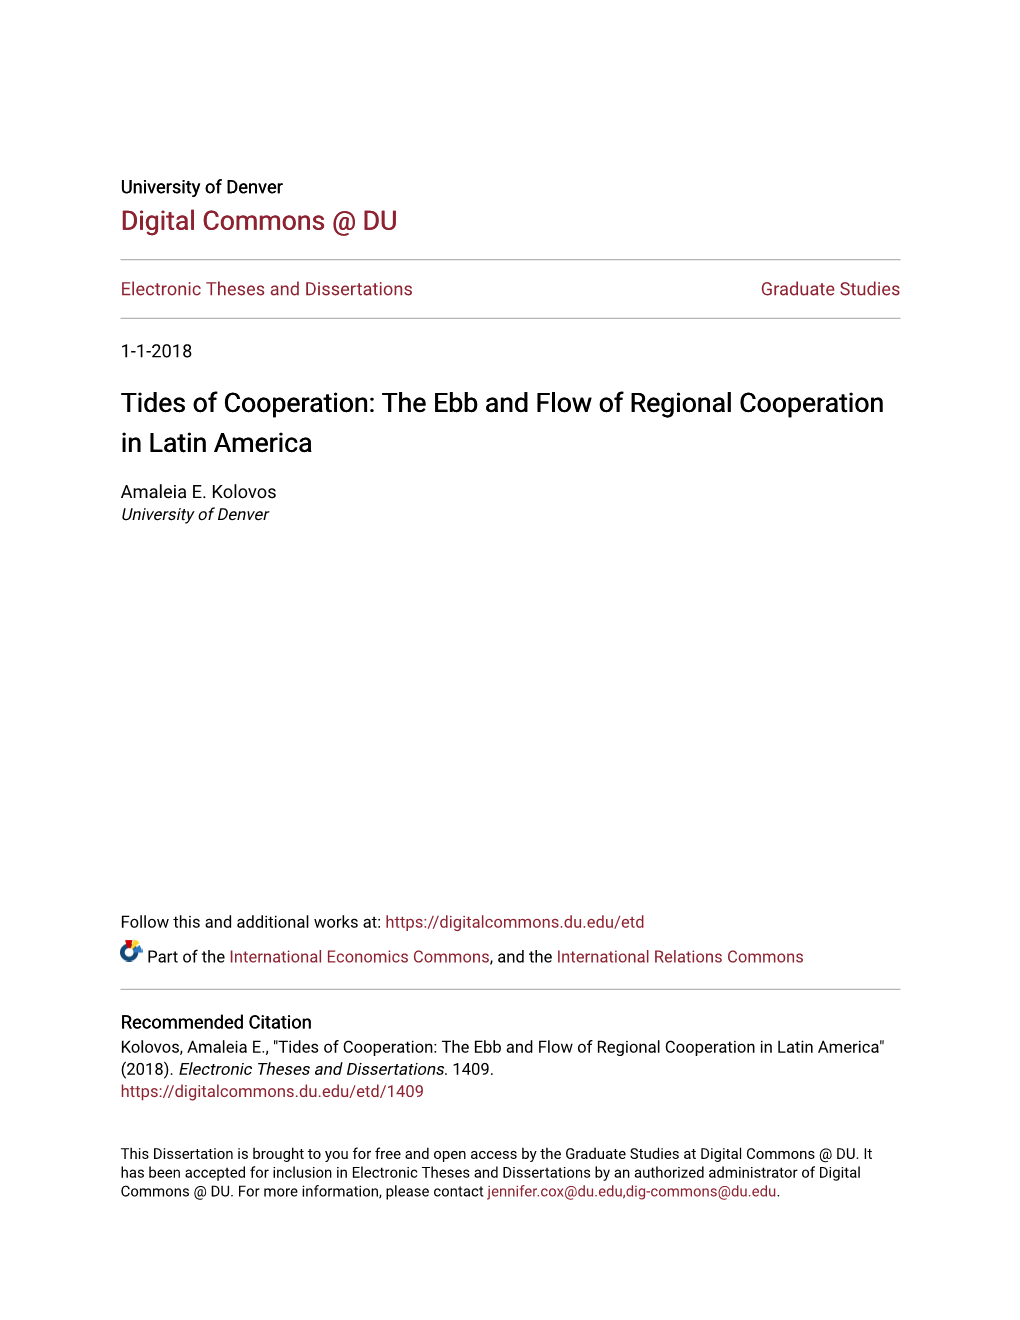 Tides of Cooperation: the Ebb and Flow of Regional Cooperation in Latin America